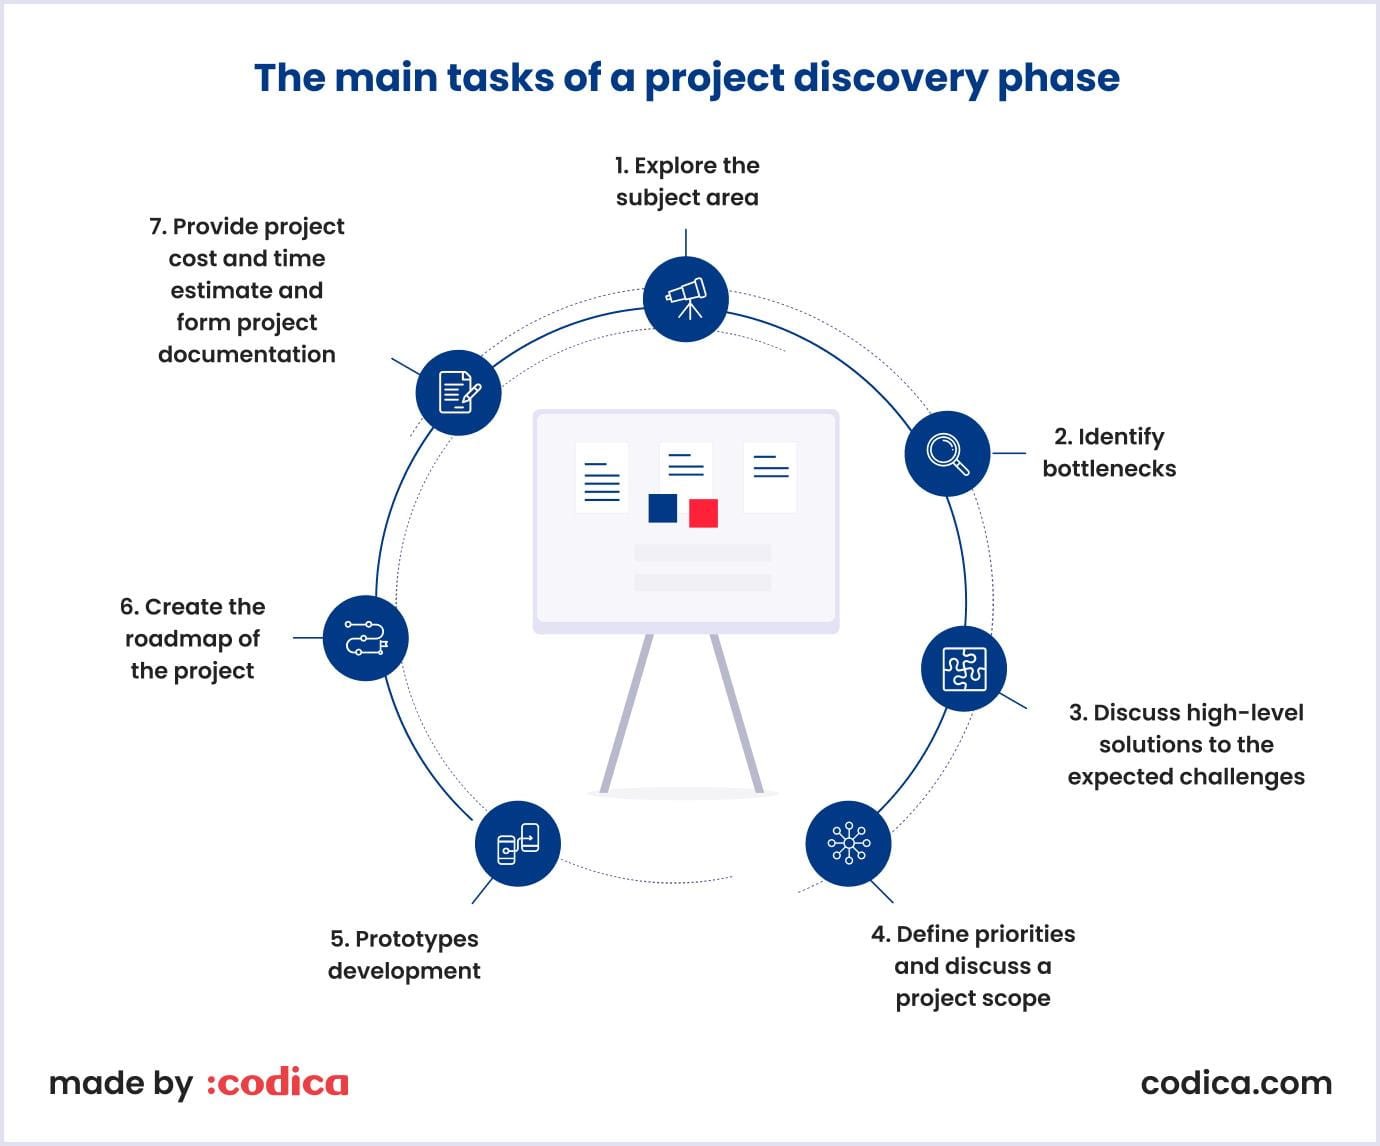 The main tasks of the project discovery phase